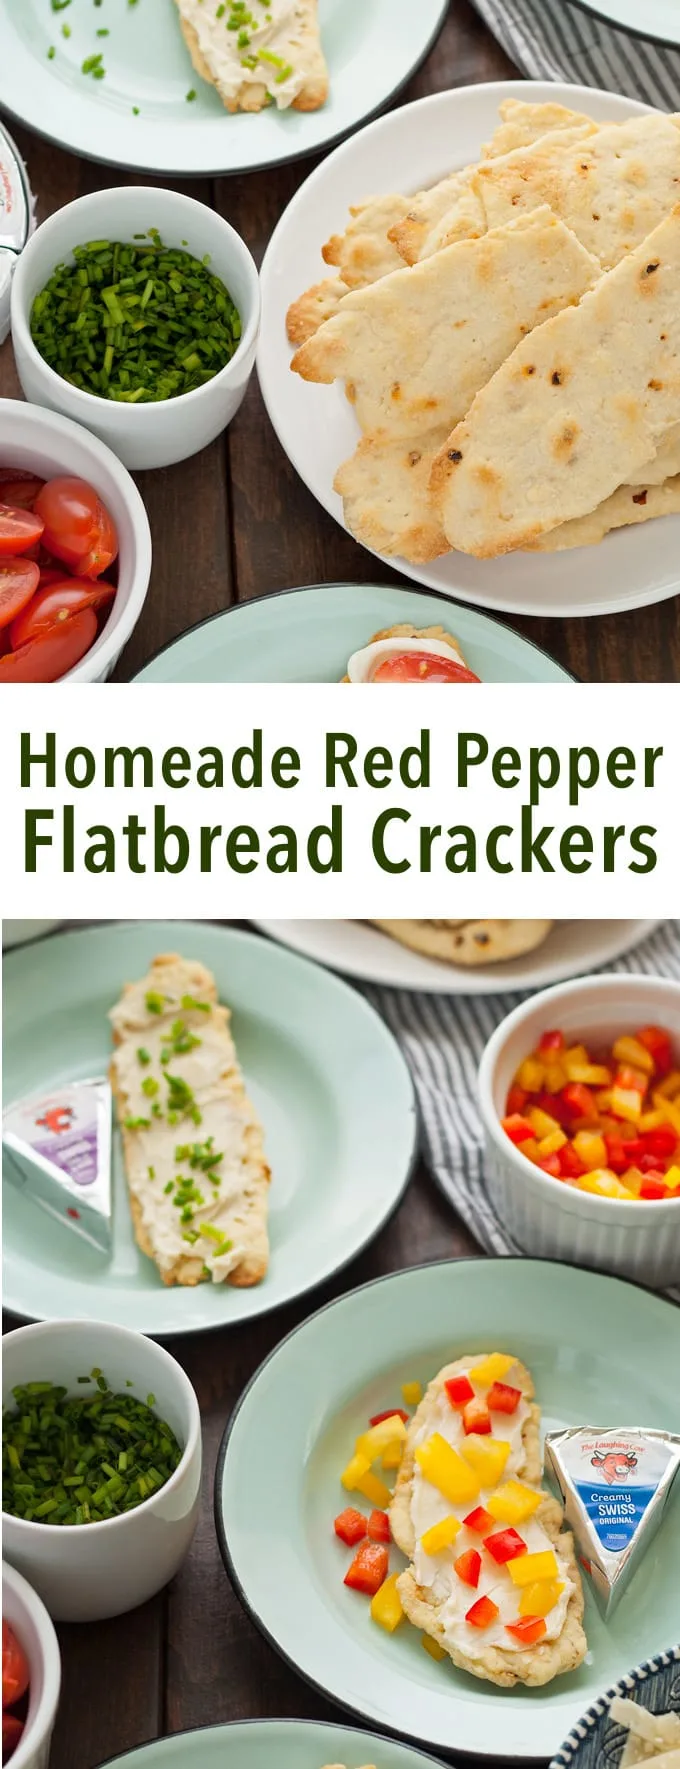 Try these homemade red pepper flatbread crackers with Laughing Cow cheese and some of these easy toppings to reinvent snacking! | honeyandbirch.com